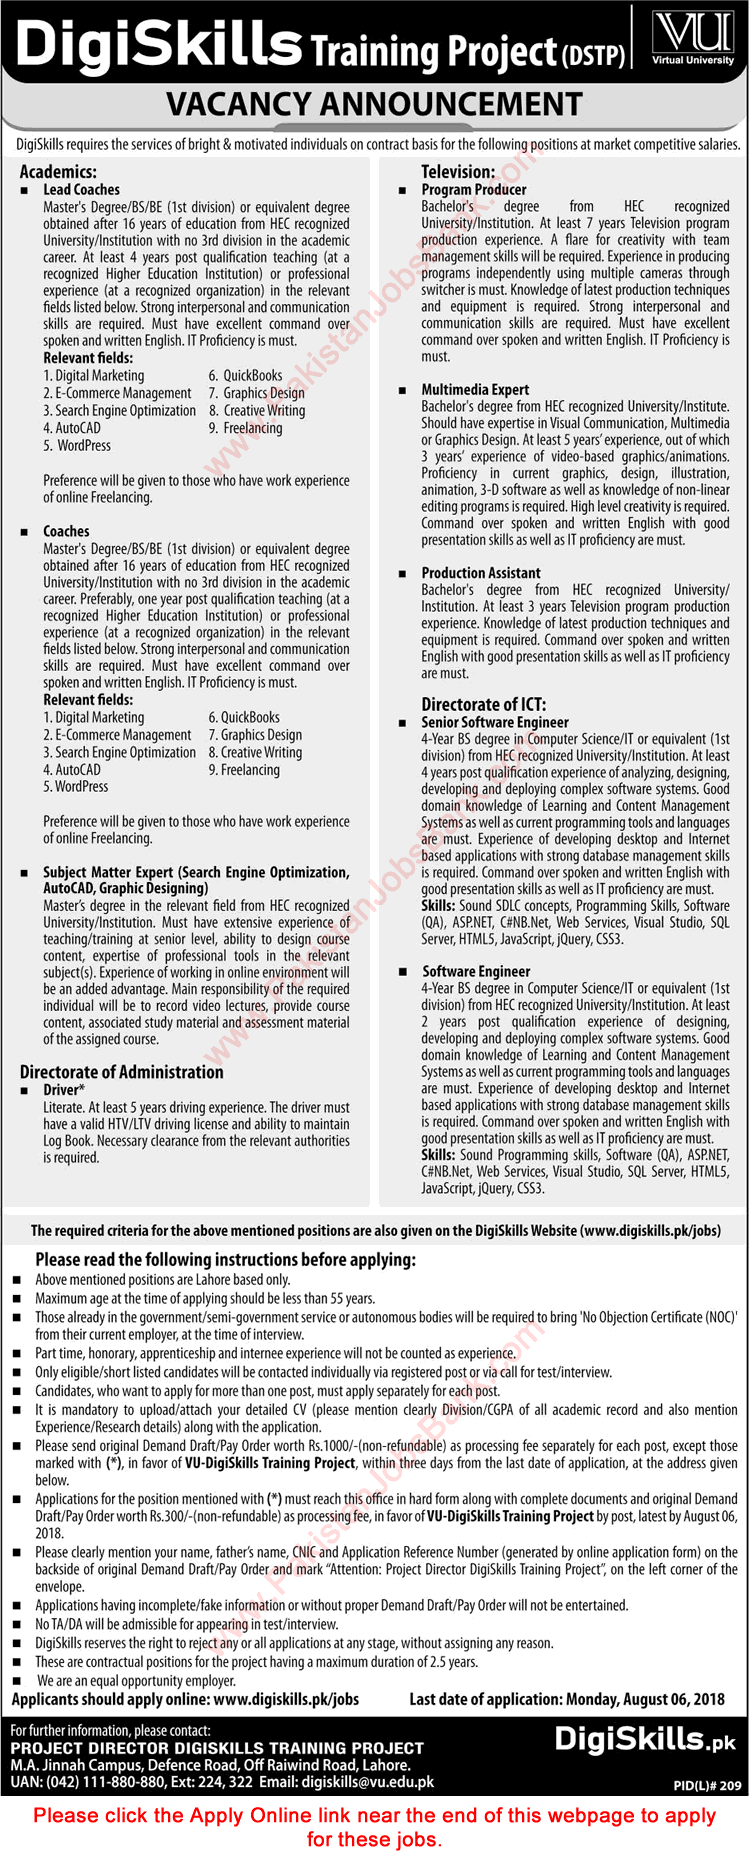 Virtual University Jobs July 2018 Apply Online Coaches, Software Engineers & Others Digiskills Training Project Latest